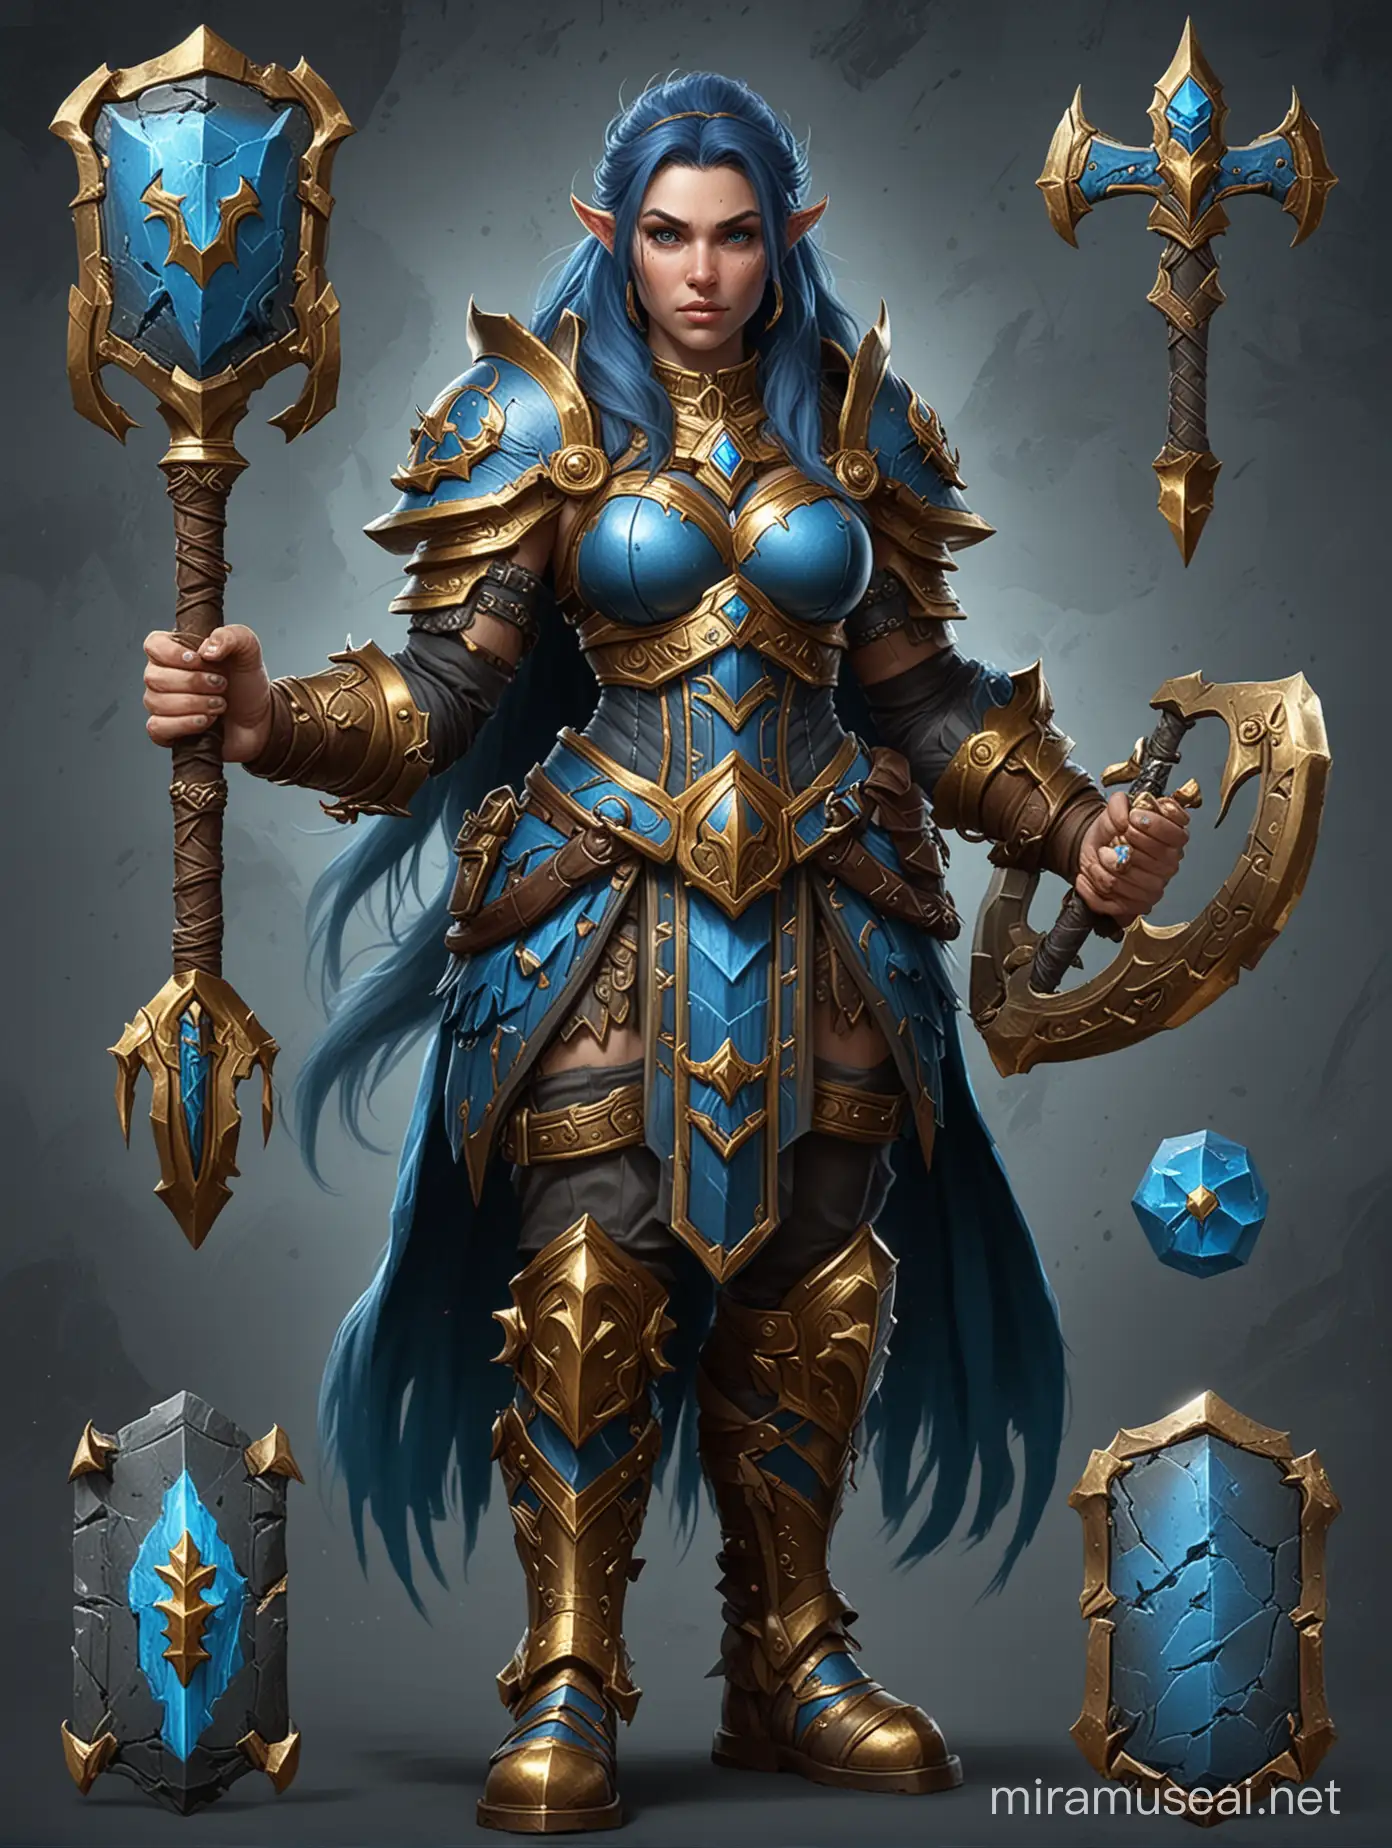 fantasy game blue dwarf warrior female character card variations, dark stone surface textures with gold accents, digital painting, game art, blizzard art style, art station